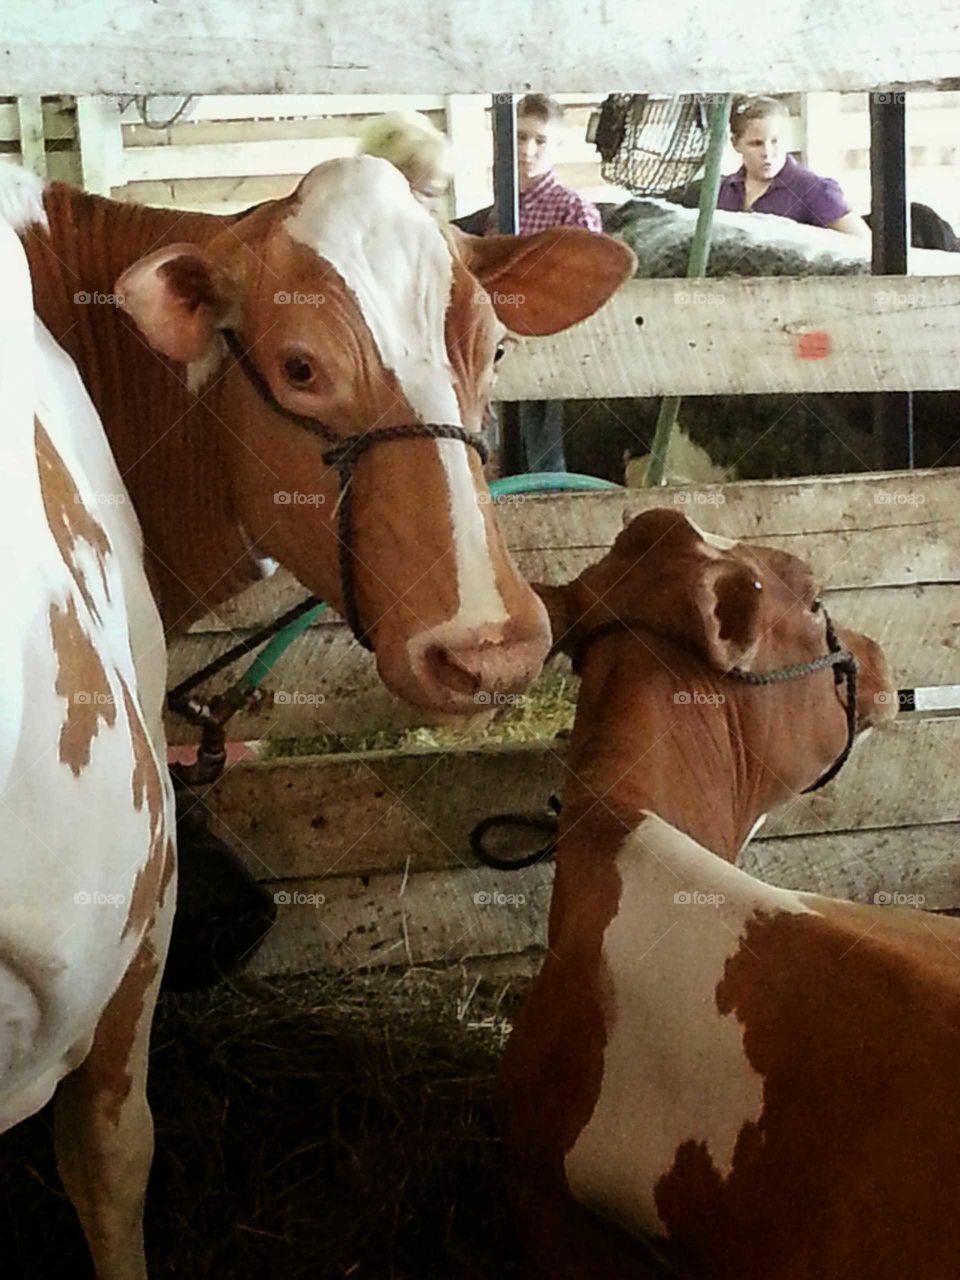 Cattle lazing in their stall in between milkings.